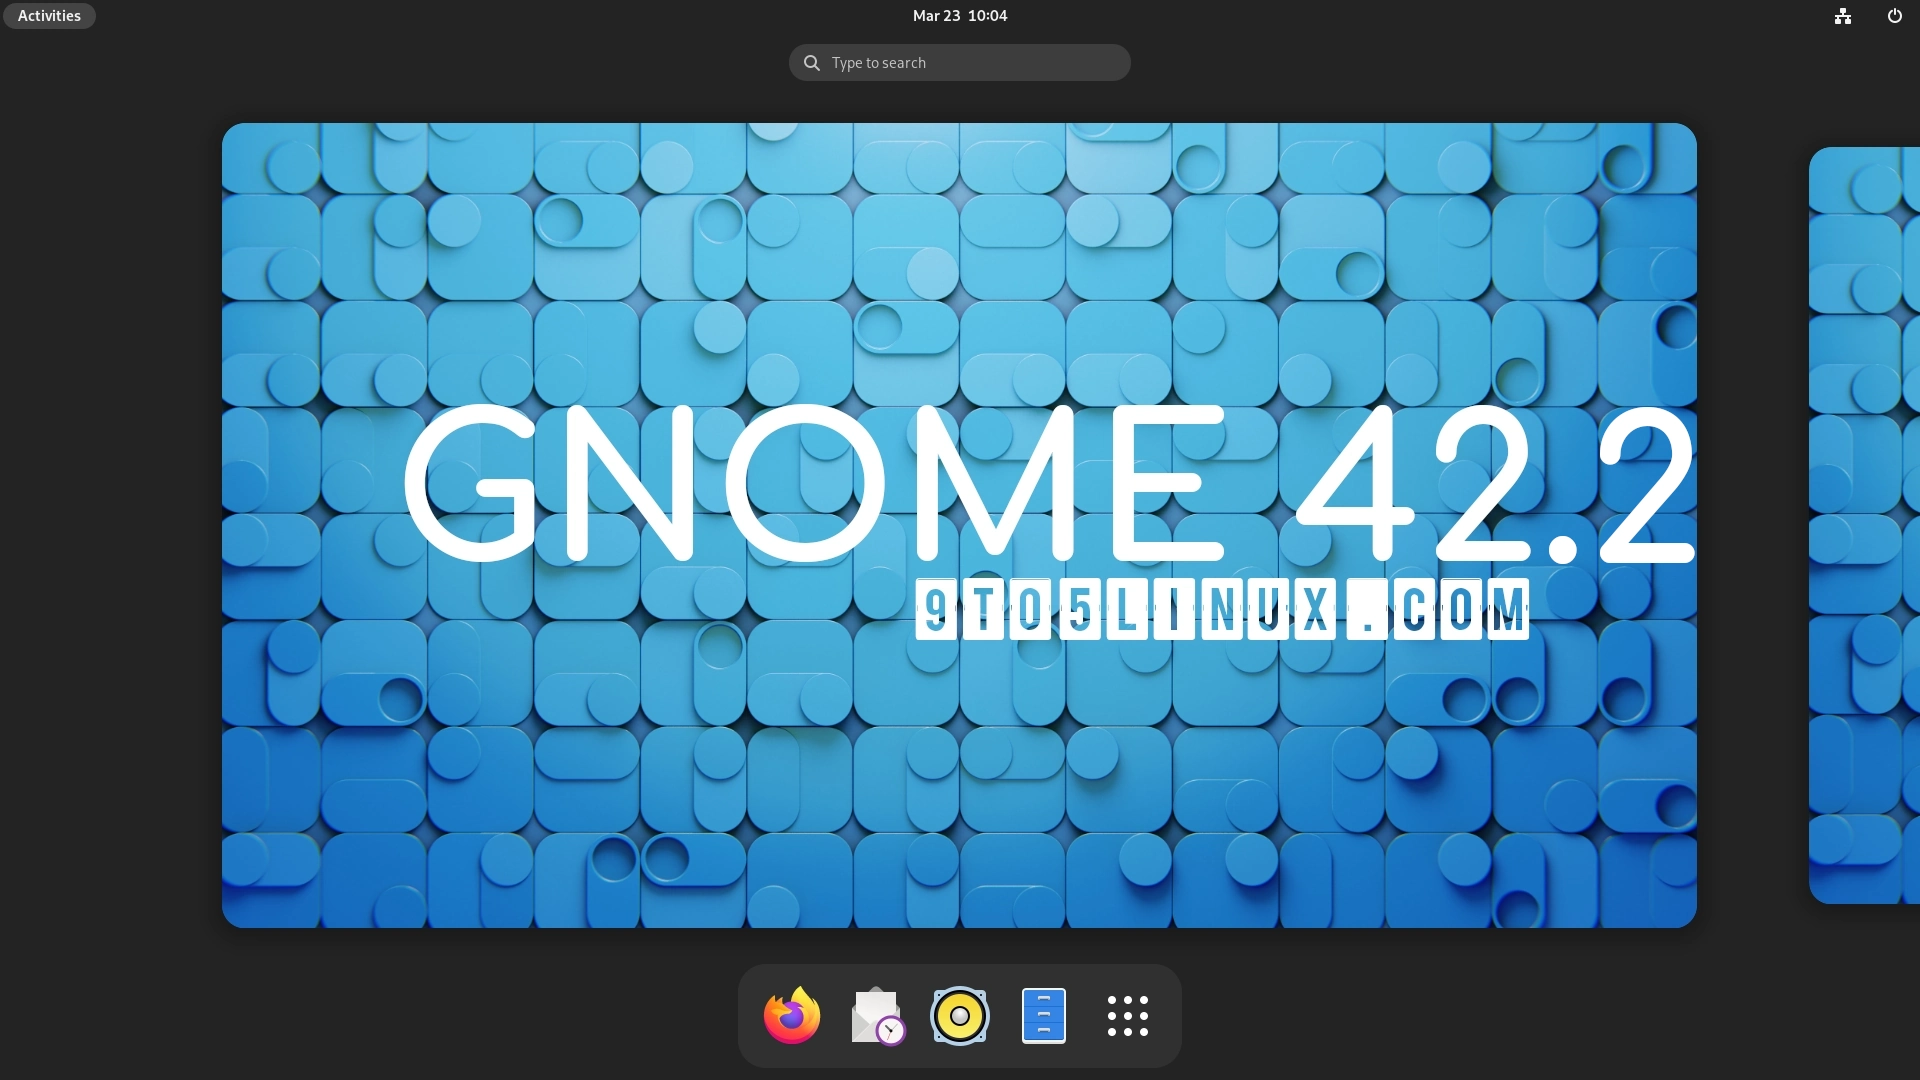 GNOME 42.2 Release Improves Support for Flatpak and Snap Apps, Fixes Many Bugs